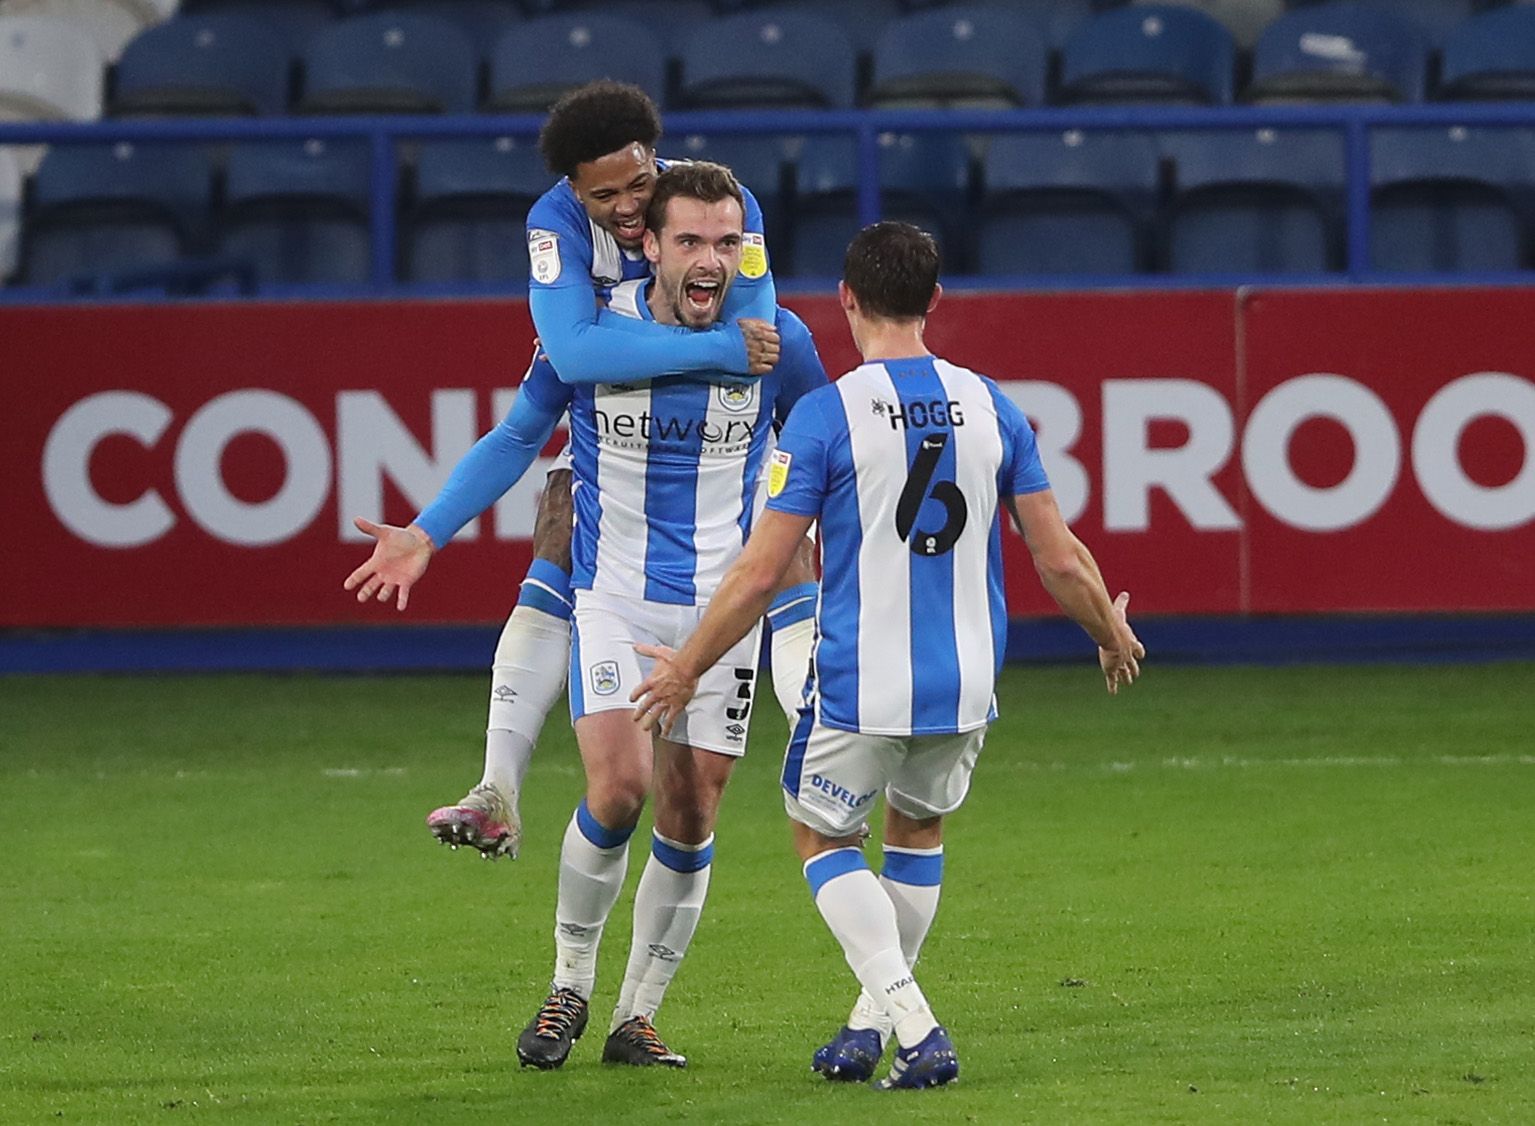 Soccer Football - Championship - Huddersfield Town v Queens Park Rangers - John Smith's Stadium, Huddersfield, Britain - December 5, 2020 Huddersfield Town's Harry Toffolo celebrates after scoring their second goal with teammates Action Images/Molly Darlington EDITORIAL USE ONLY. No use with unauthorized audio, video, data, fixture lists, club/league logos or 'live' services. Online in-match use limited to 75 images, no video emulation. No use in betting, games or single club /league/player publ